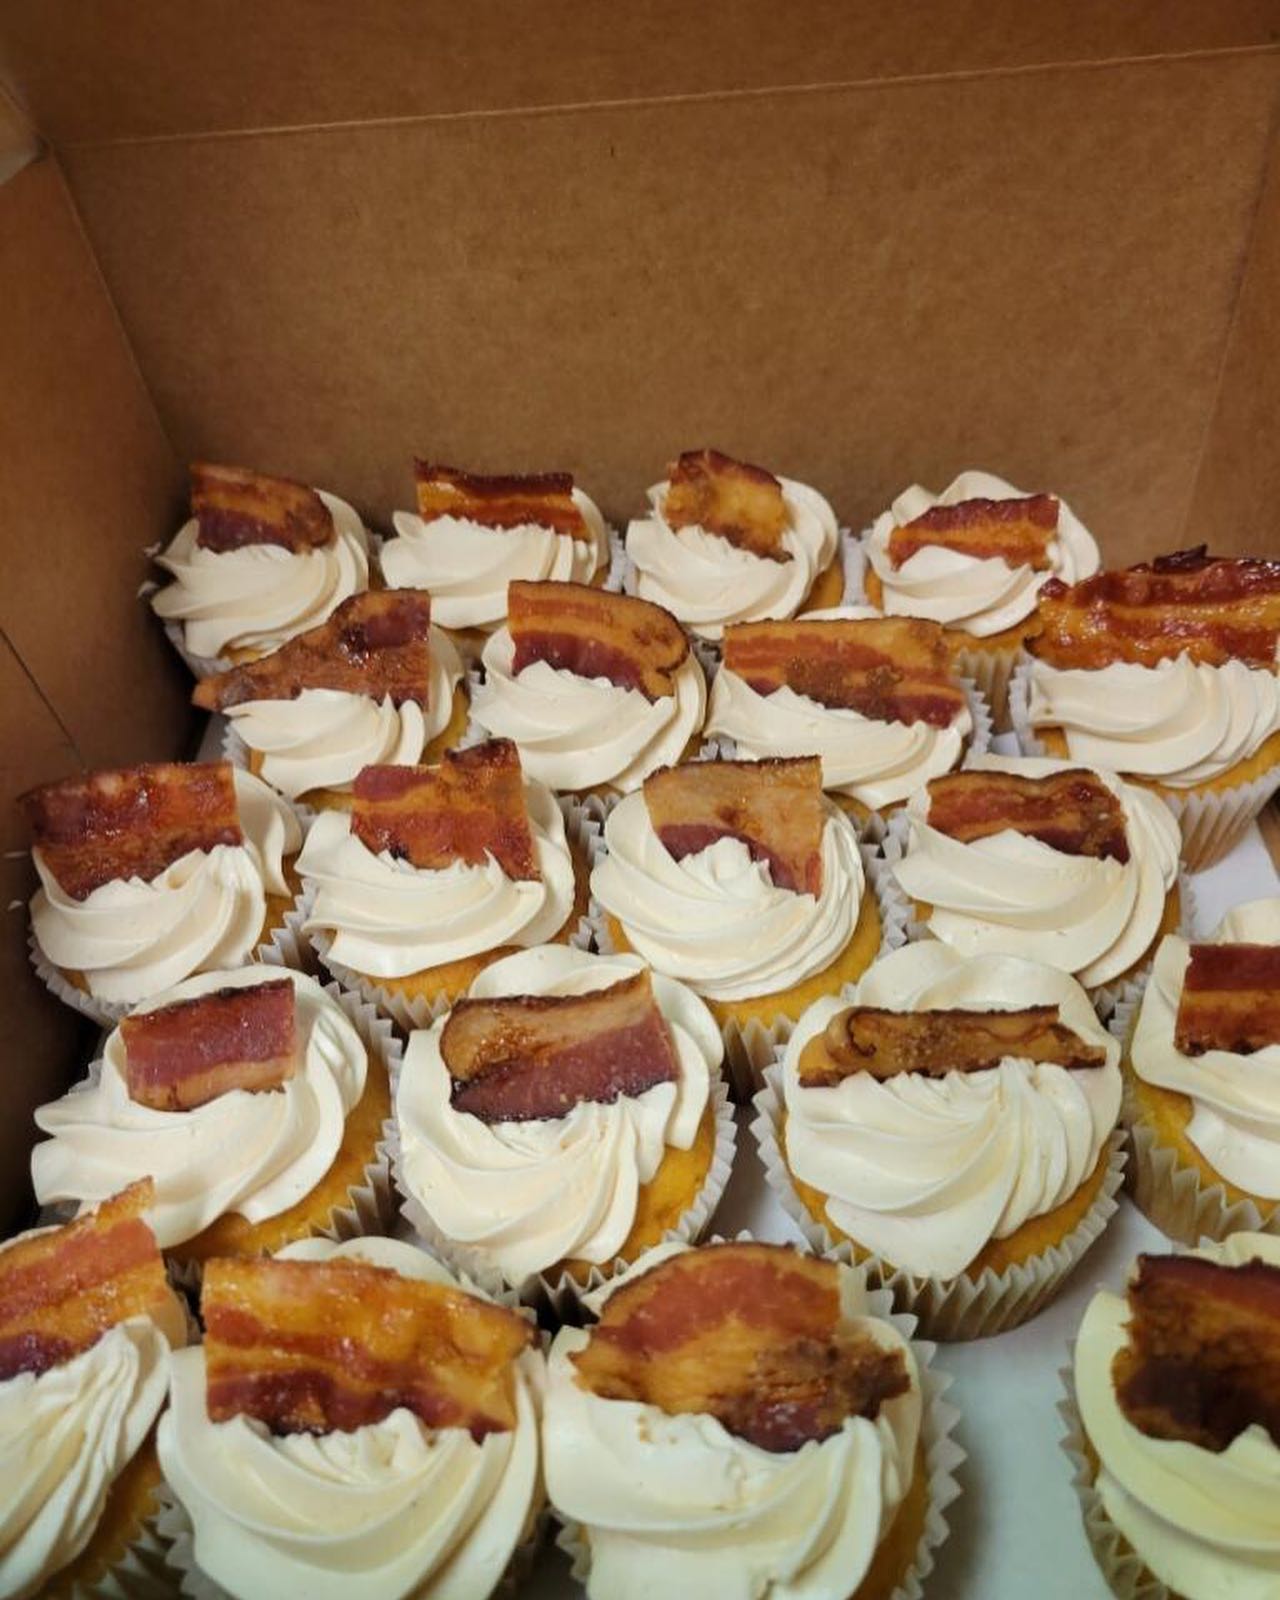 elvis themed cupcakes topped with bacon